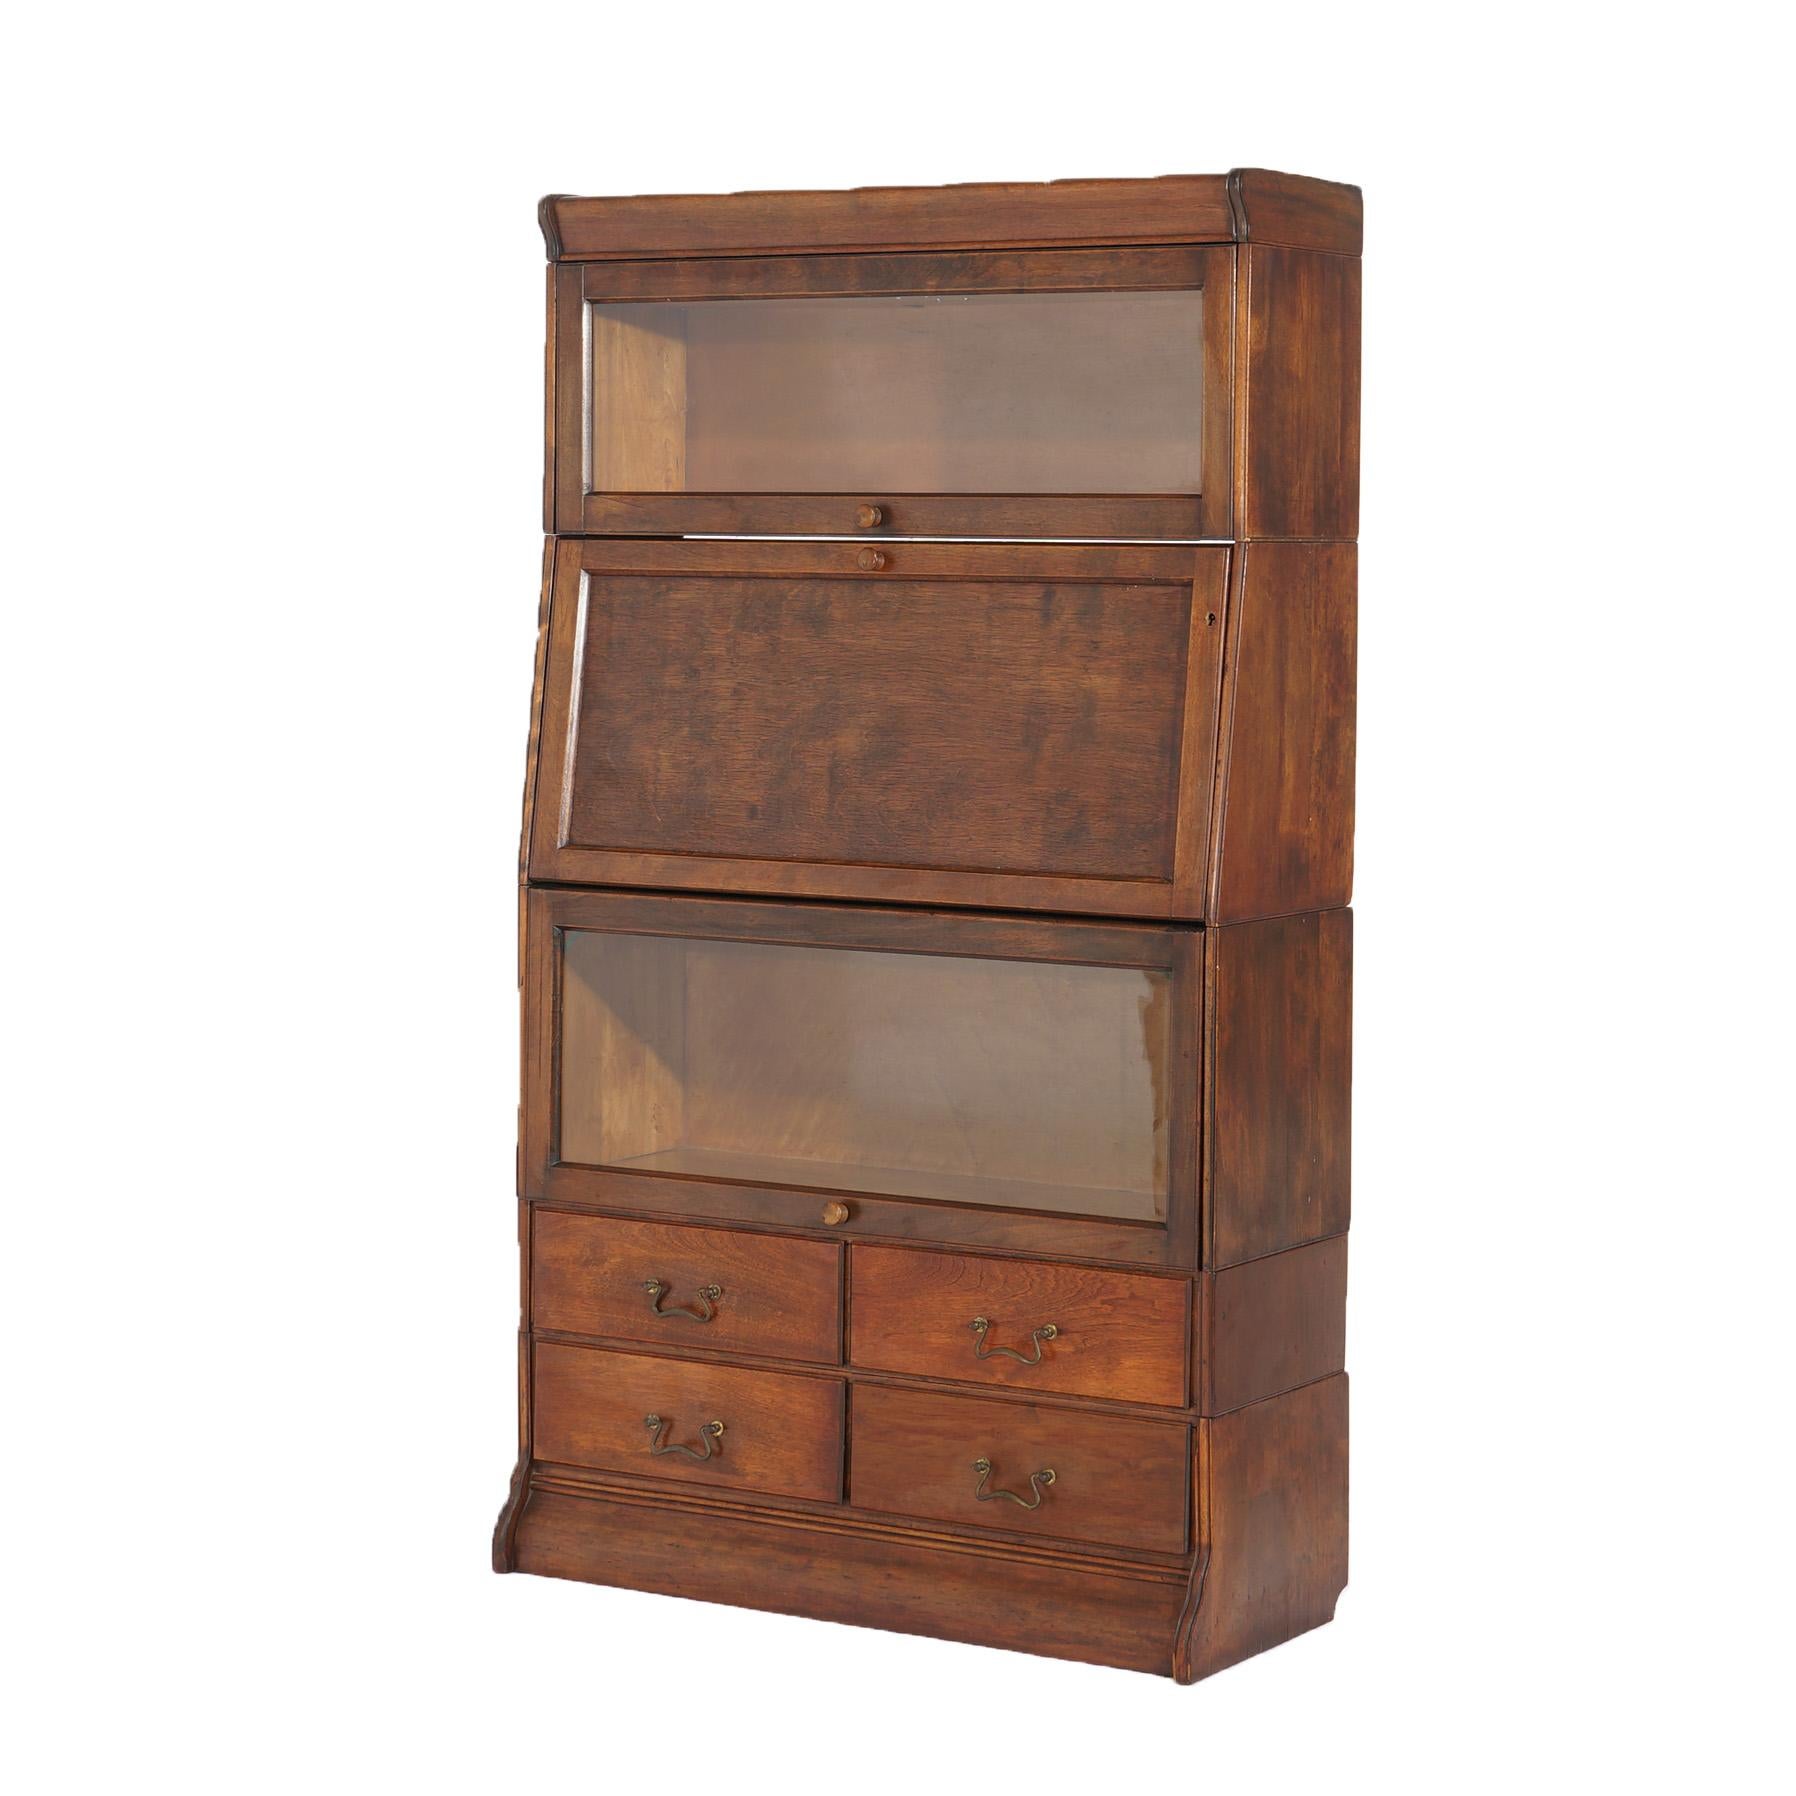 ***Ask About Discounted In-House Shipping***
An antique Arts and Crafts barrister bookcase offers mahogany construction with central secretary case having drop down desk, flanking bookcases having pull out glass doors and lower drawer unit,